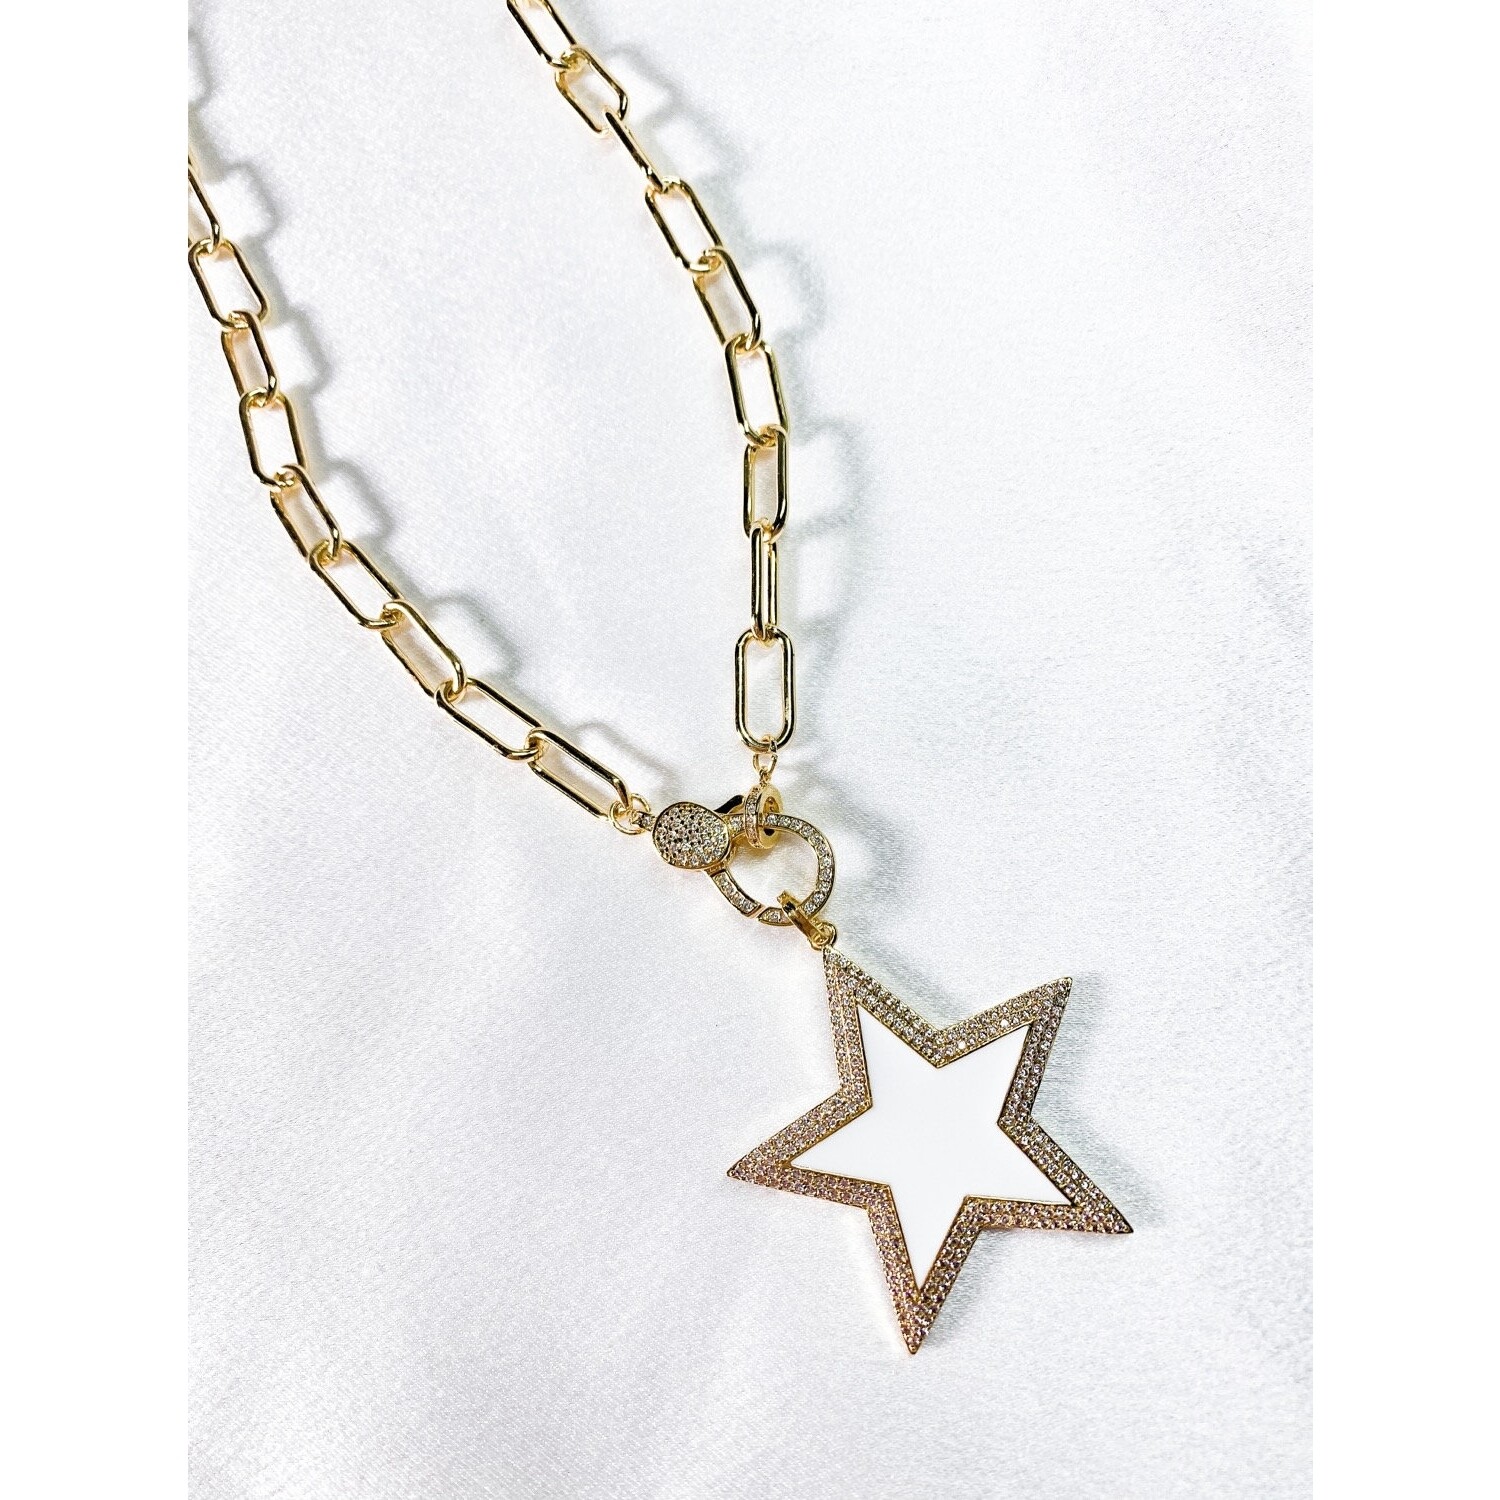 Haley Star Necklace - Gold Plated, Handmade